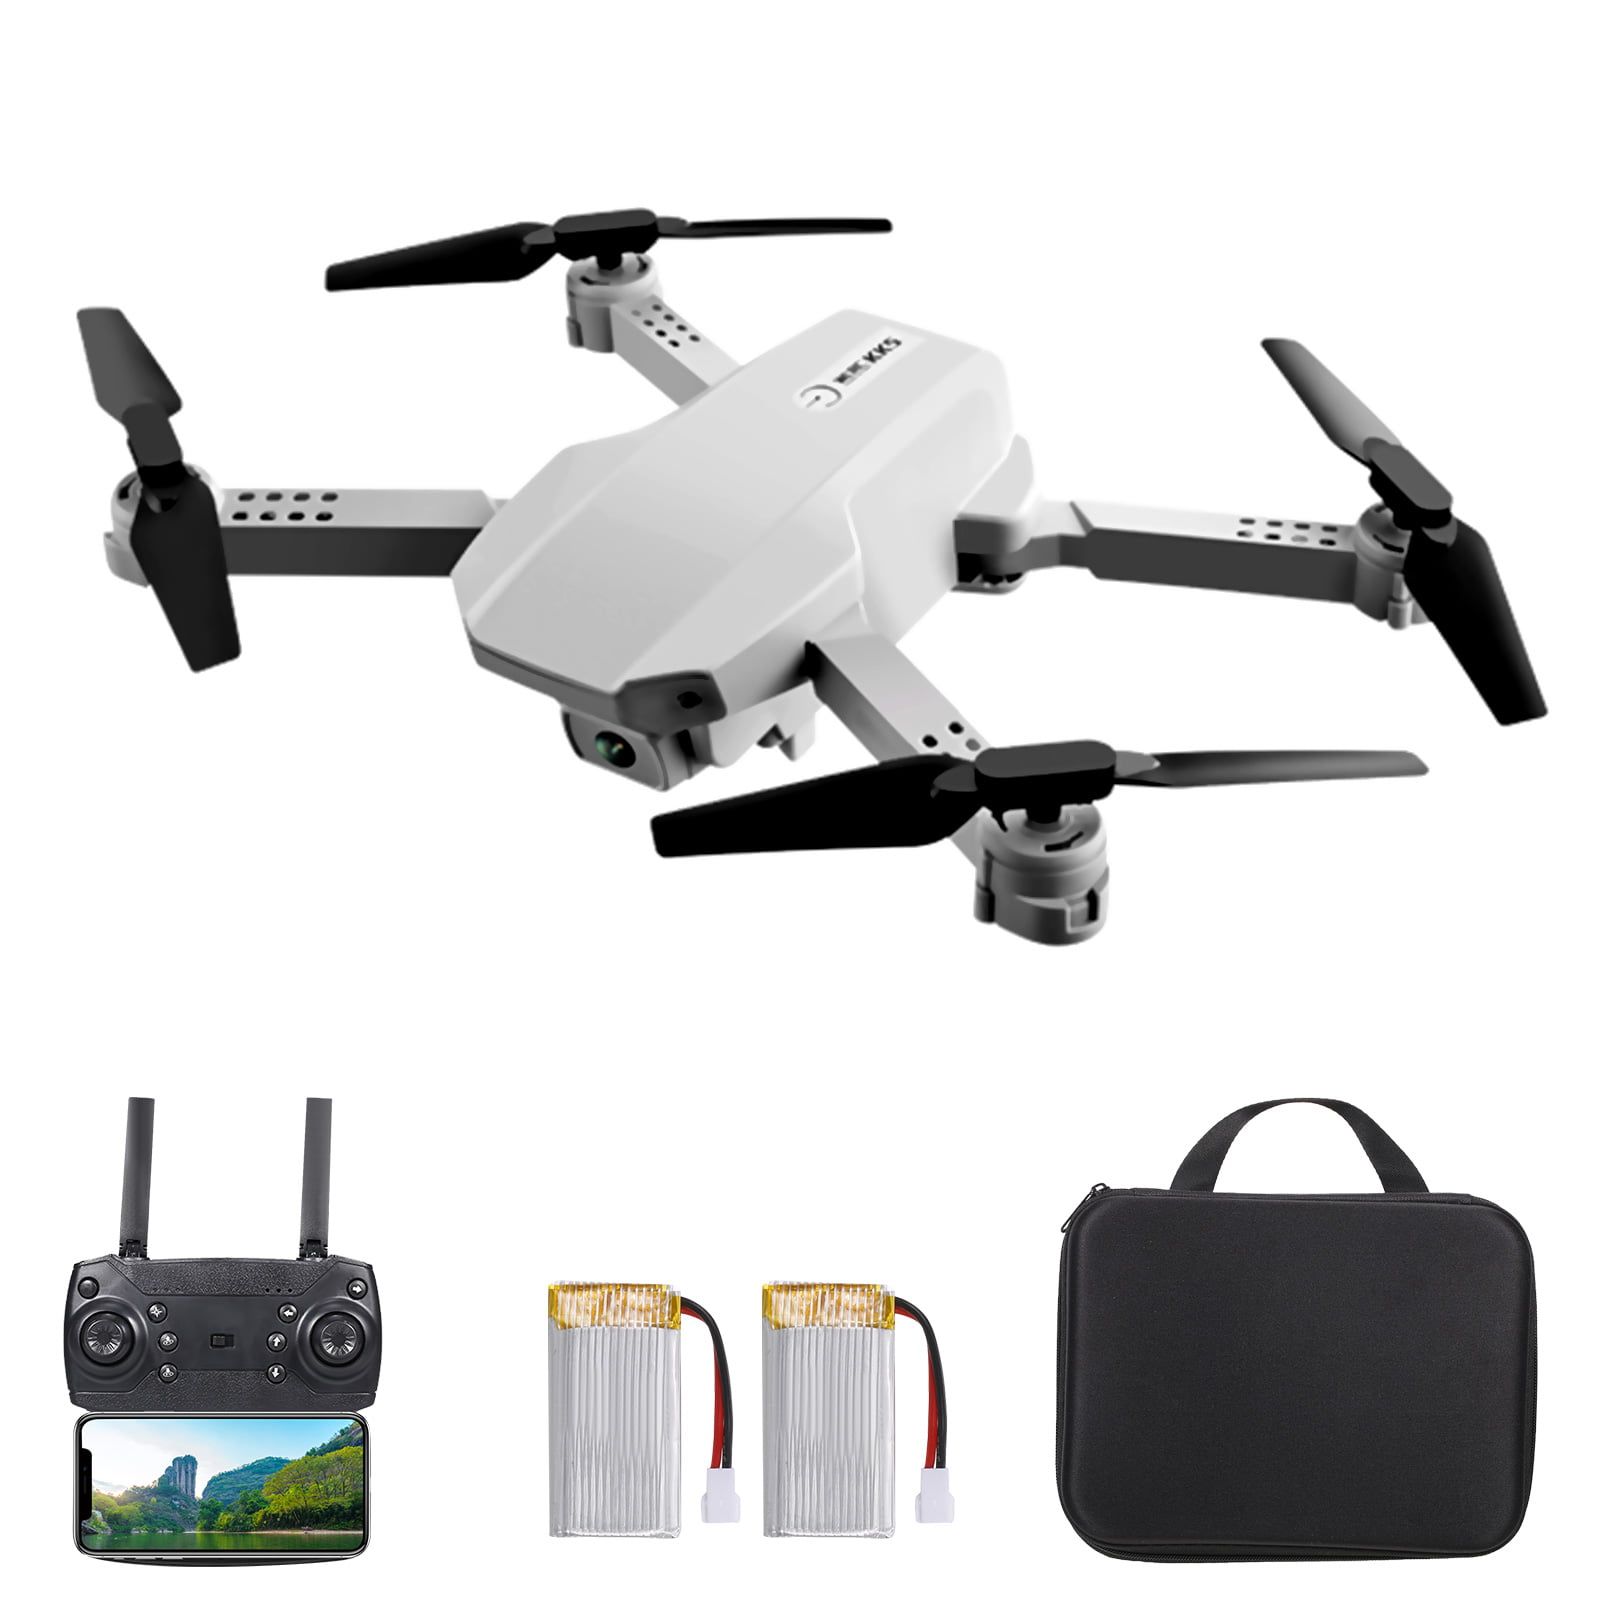 GoolRC RC Drone with Camera 4K WiFi FPV Dual Camera Drone Mini Folding Quadcopter Toy for Kids with Gravity Sensor Control Headless Mode Gesture Photo Video Function with Storage Bag 3 Batteries